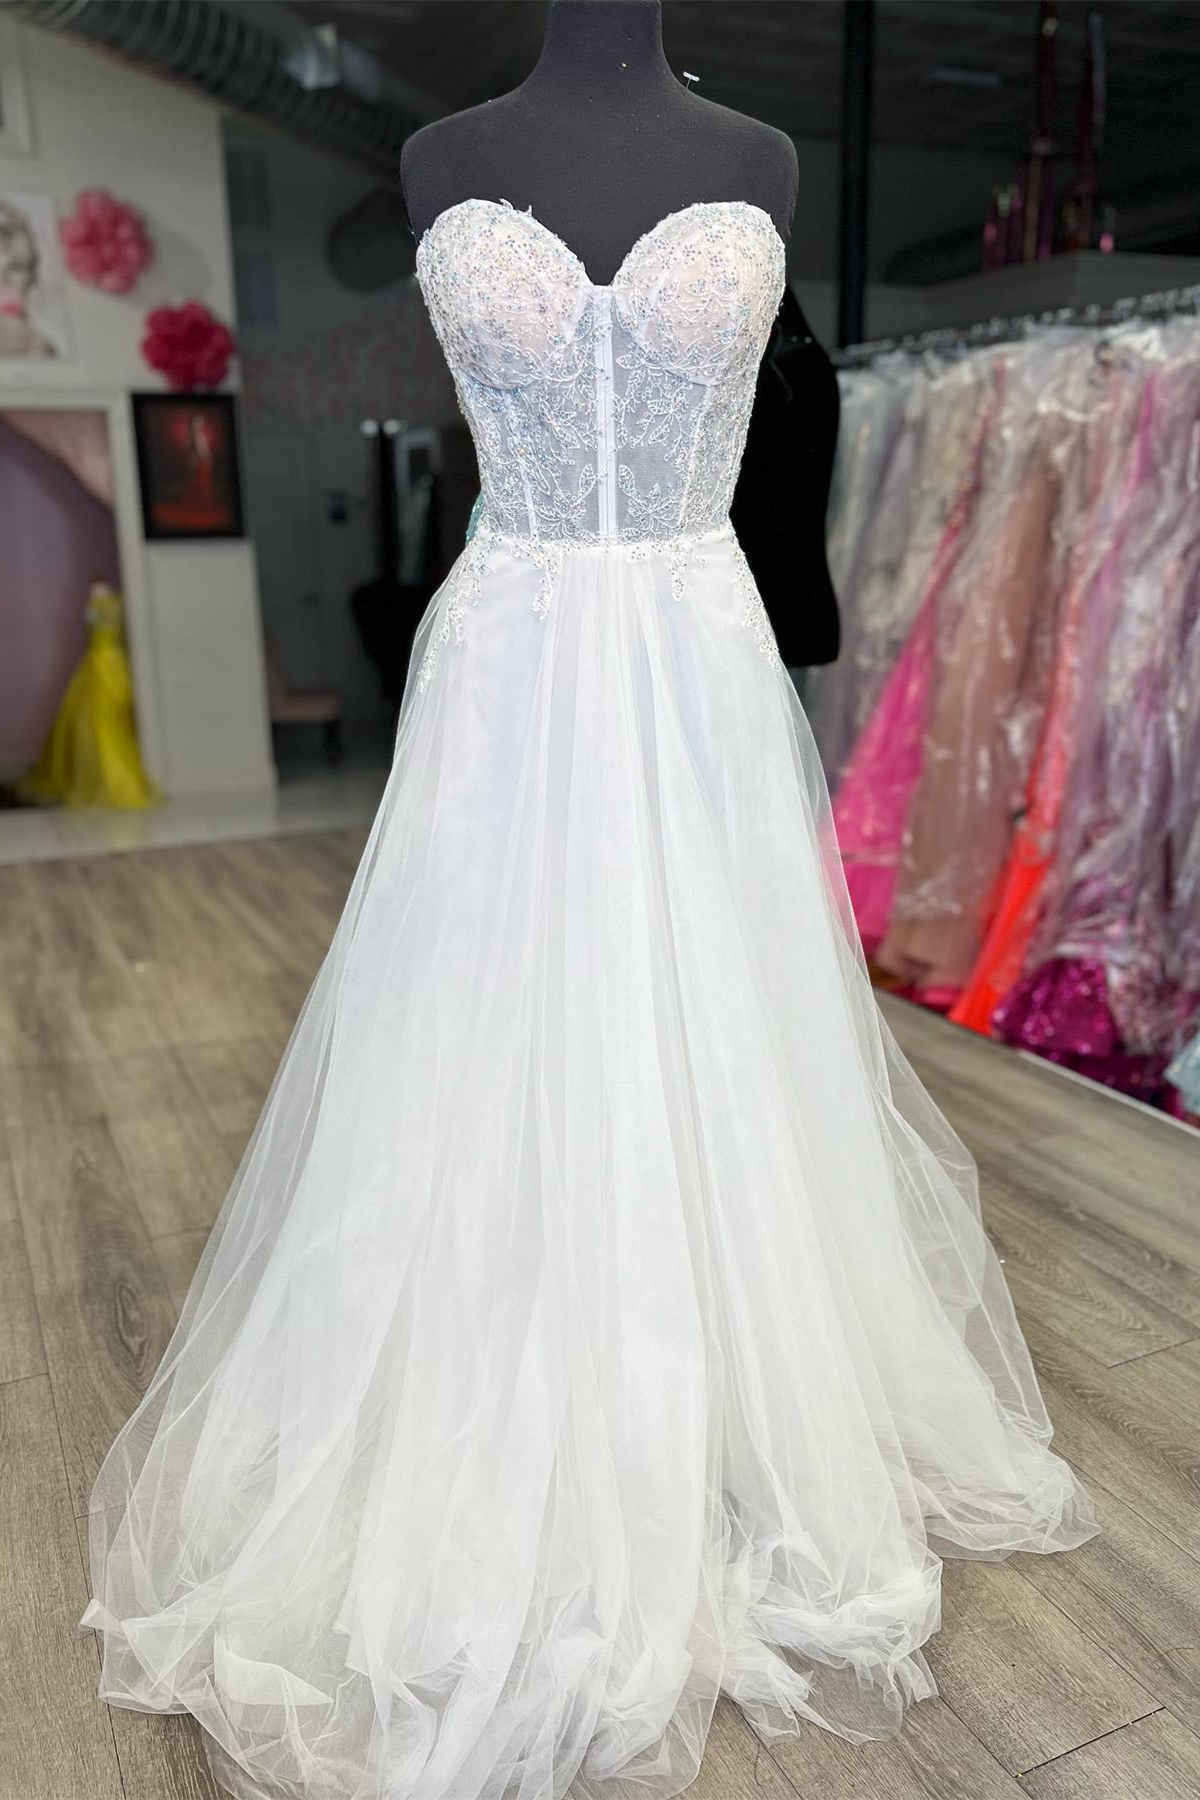 Strapless White Lace Corset Long Formal Dress with Rhinestones